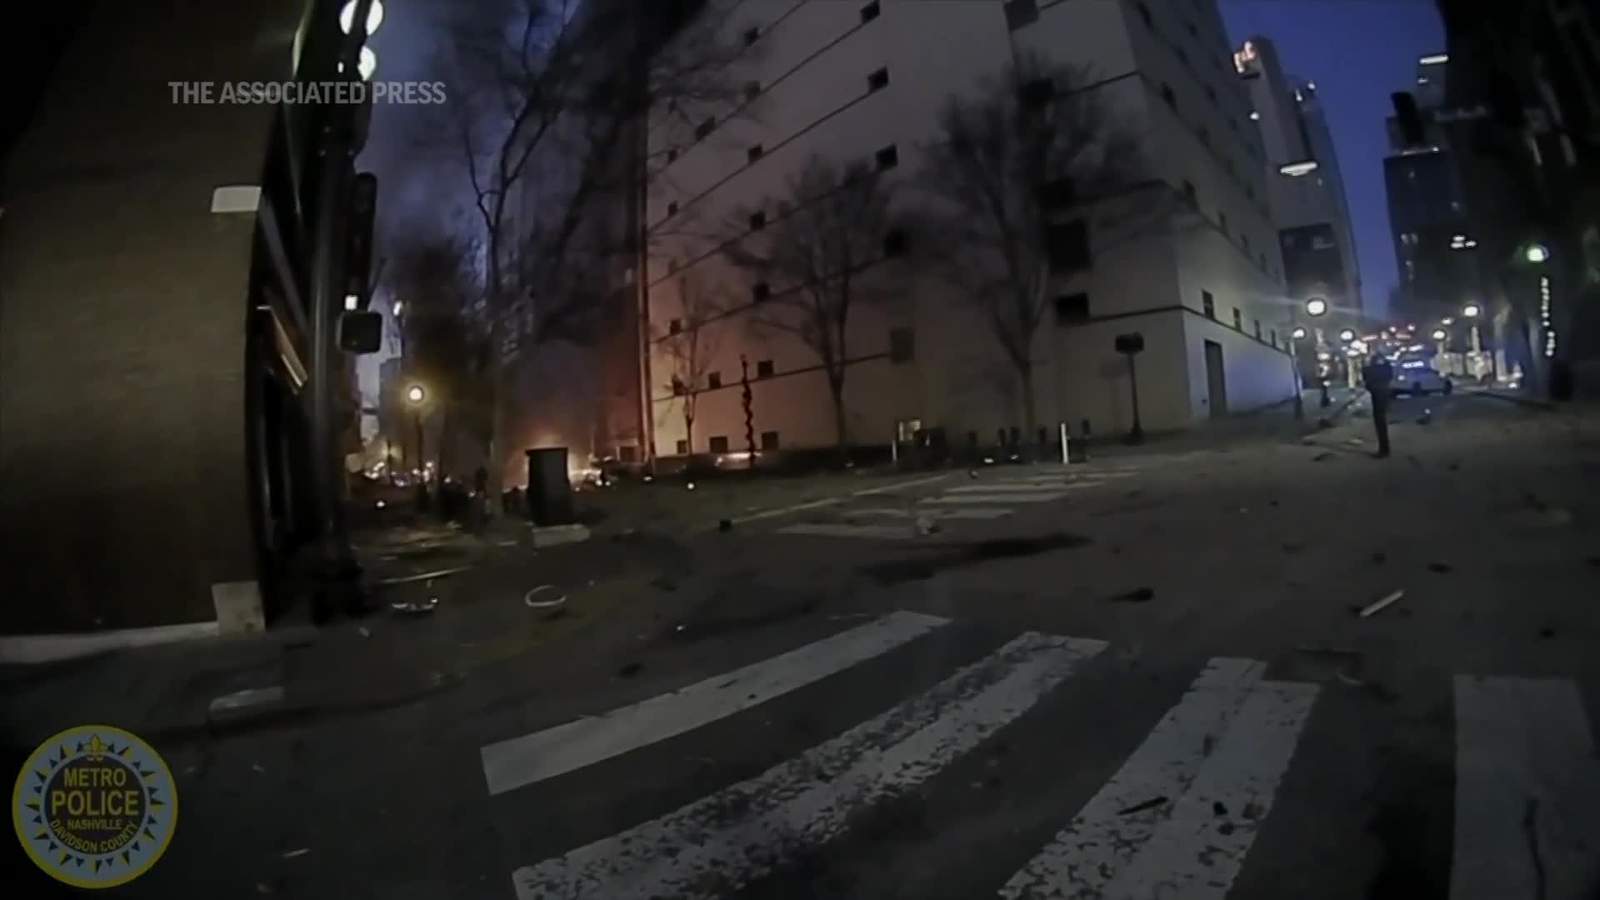 WATCH: Nashville police bodycam footage shows moments after Christmas Day blast